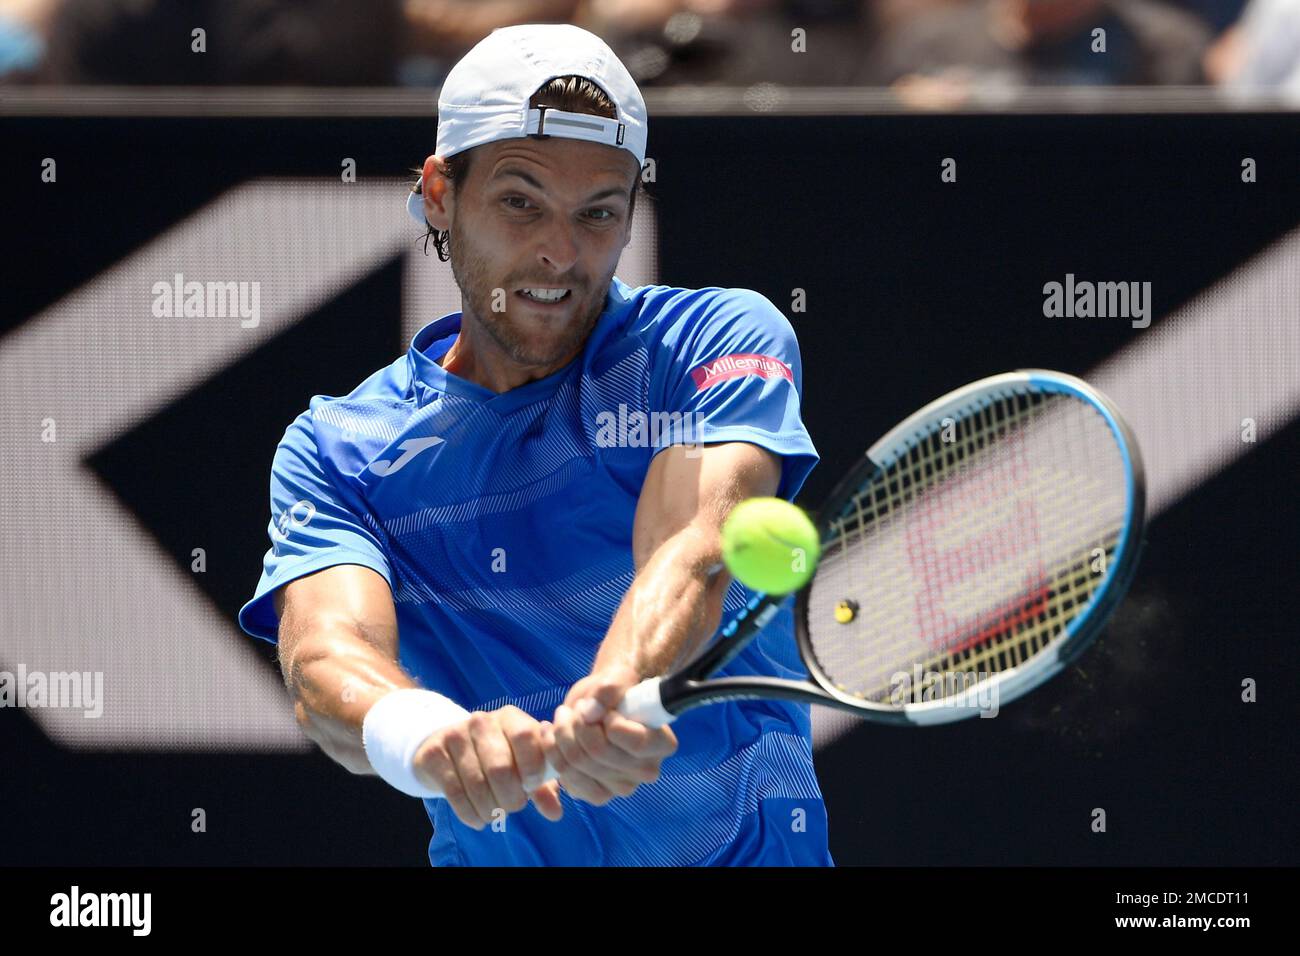 Joao Sousa of Portugal plays a backhand return to Jannik Sinner of Italy  during their first round match at the Australian Open tennis championships  in Melbourne, Australia, Tuesday, Jan. 18, 2022. (AP